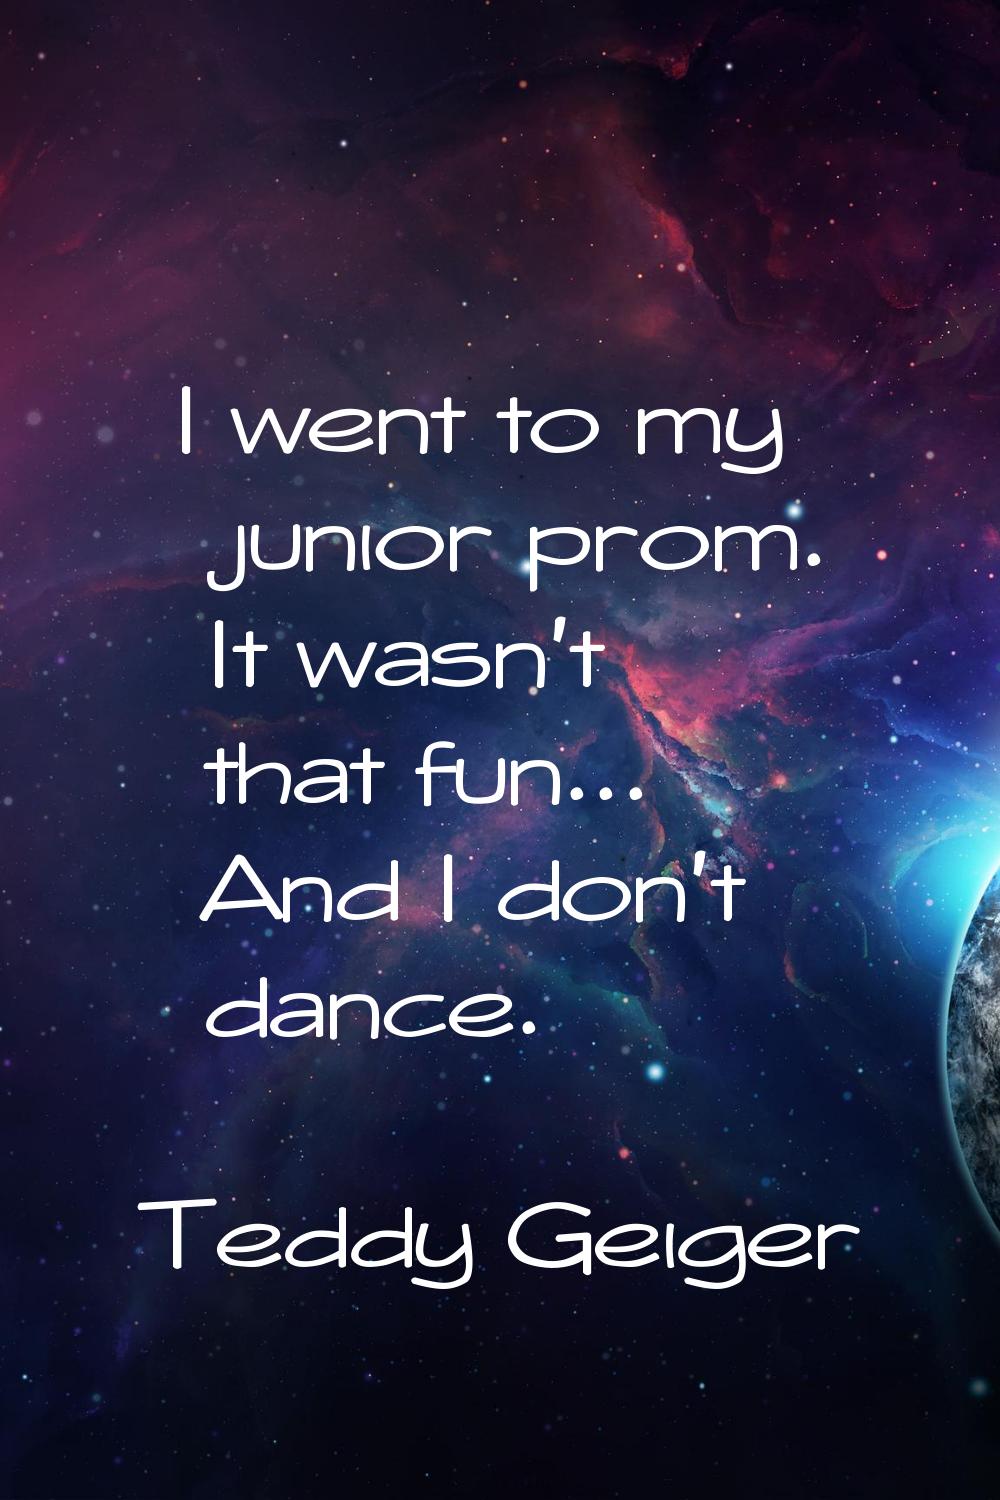 I went to my junior prom. It wasn't that fun... And I don't dance.